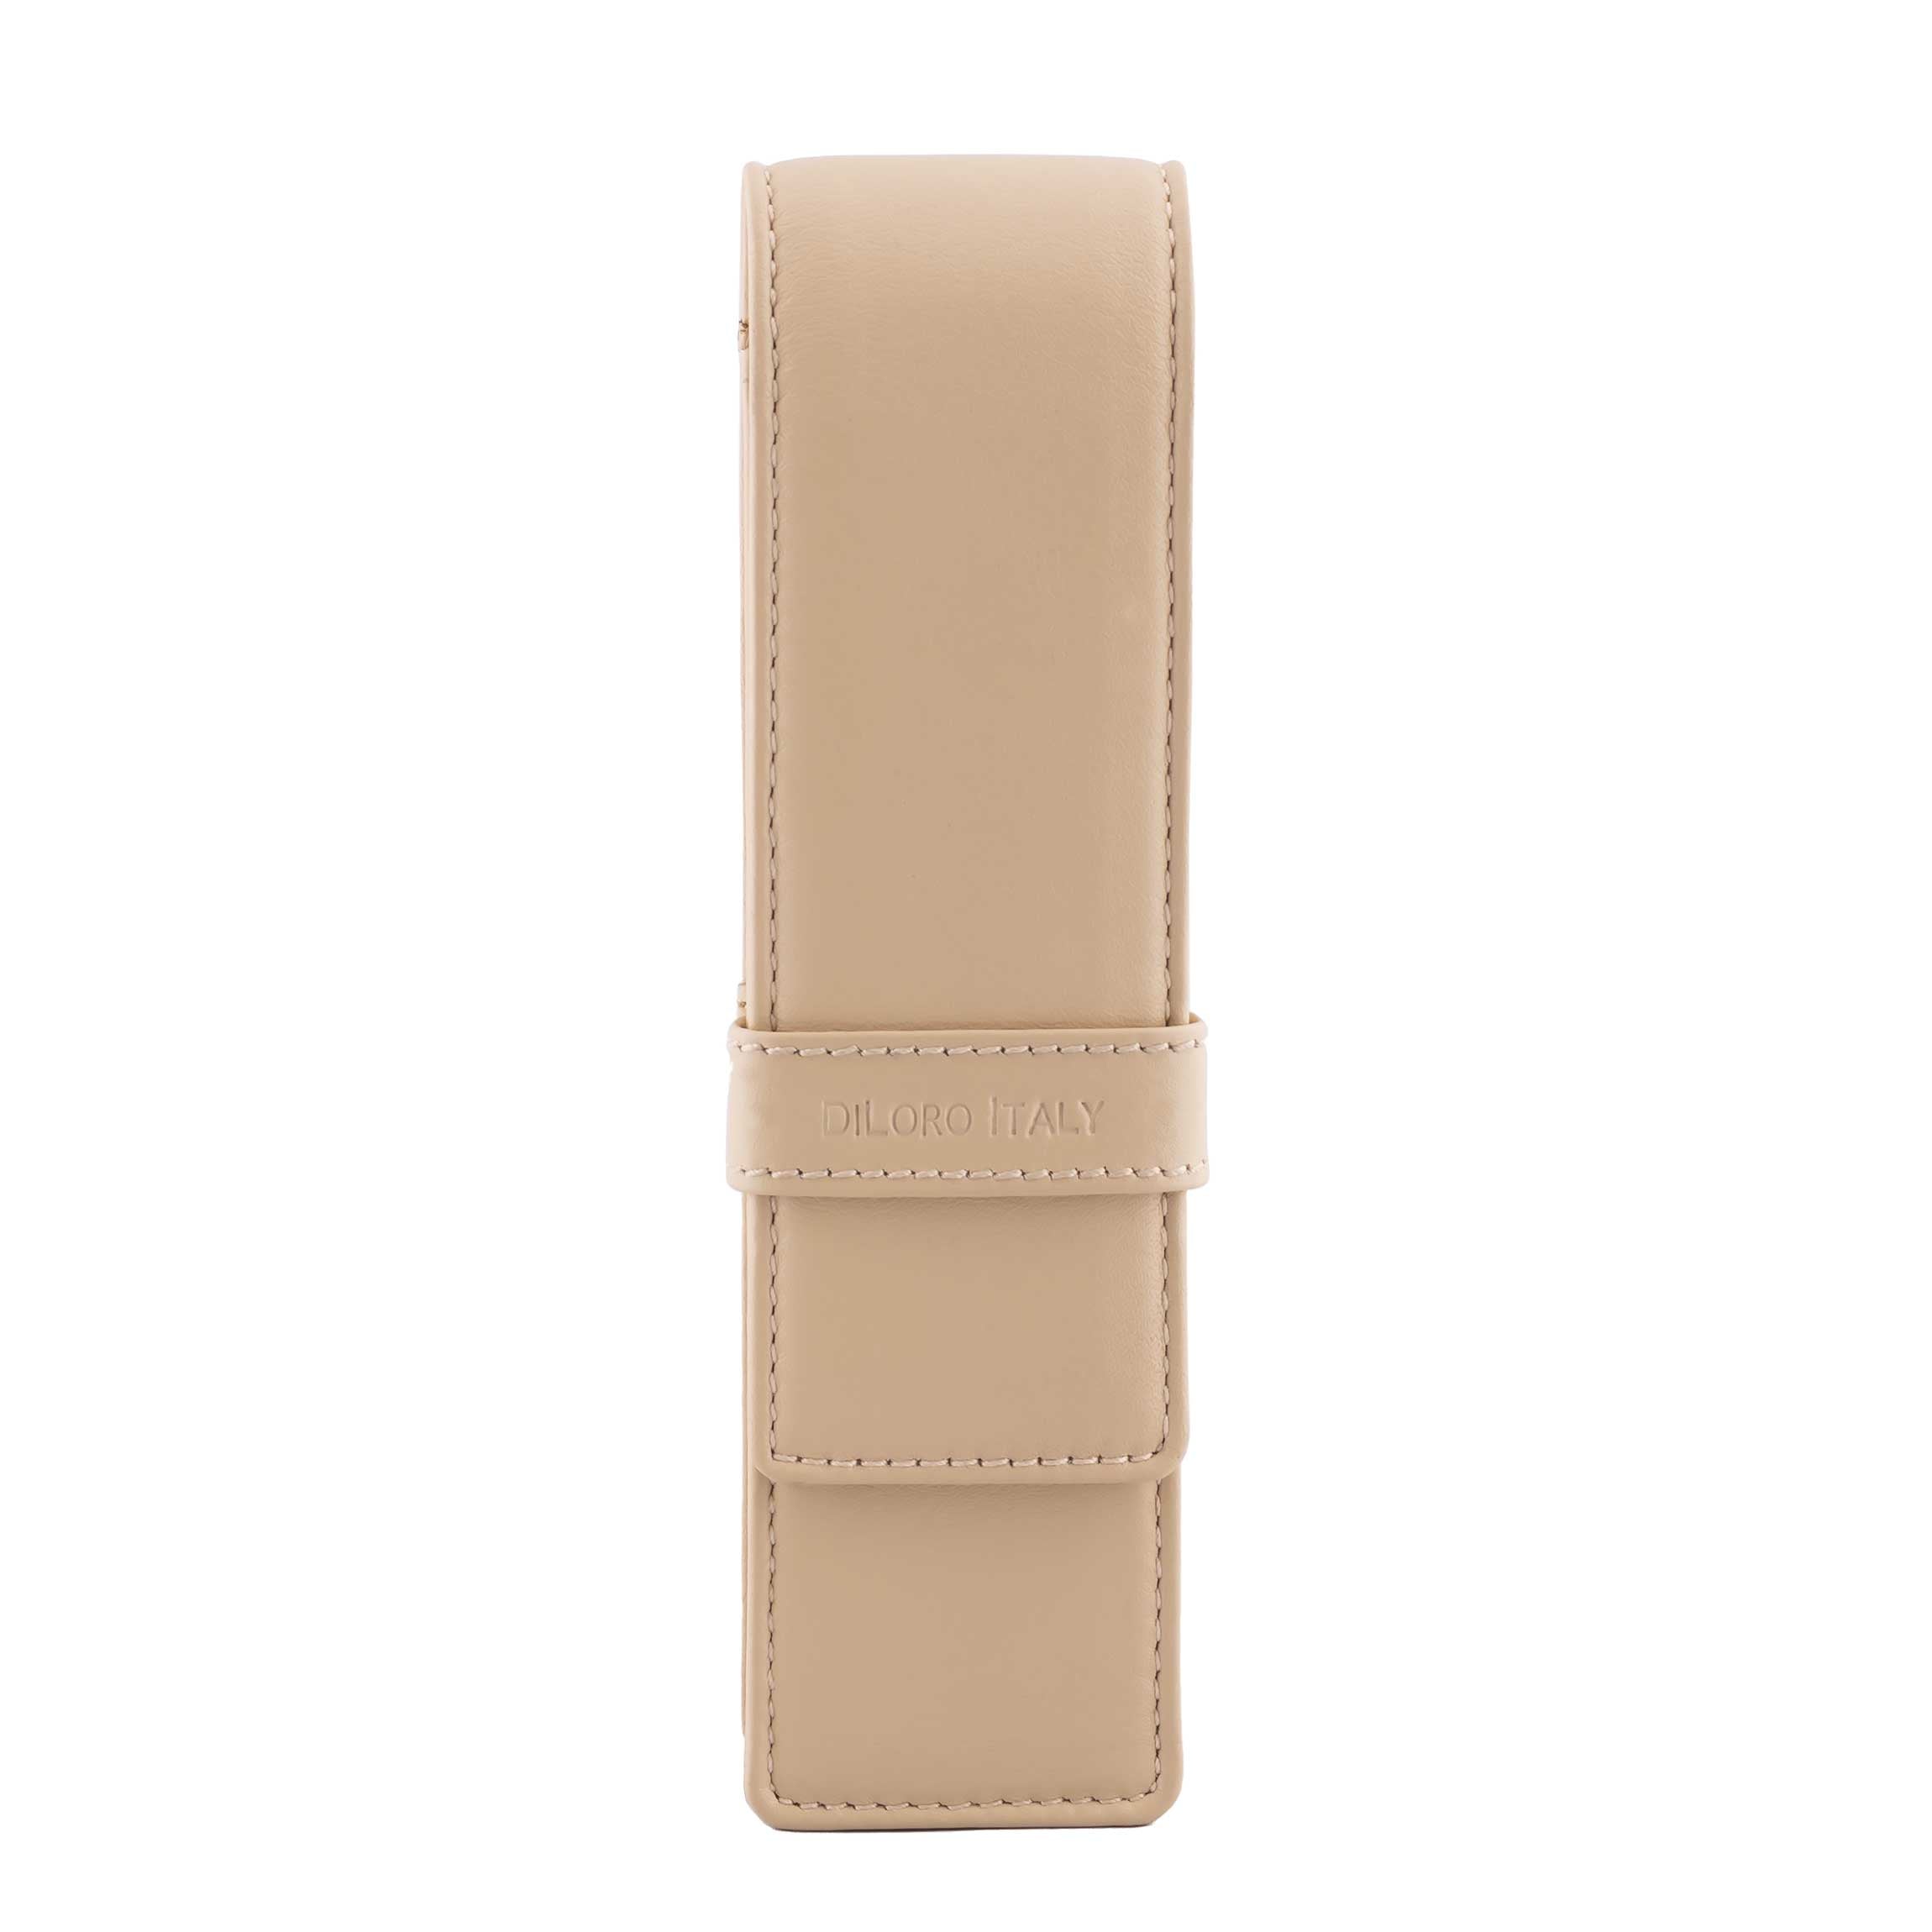 DiLoro Double Pen Case Holder in Top Quality, Full Grain Nappa Leather - Beige (Off White), Front